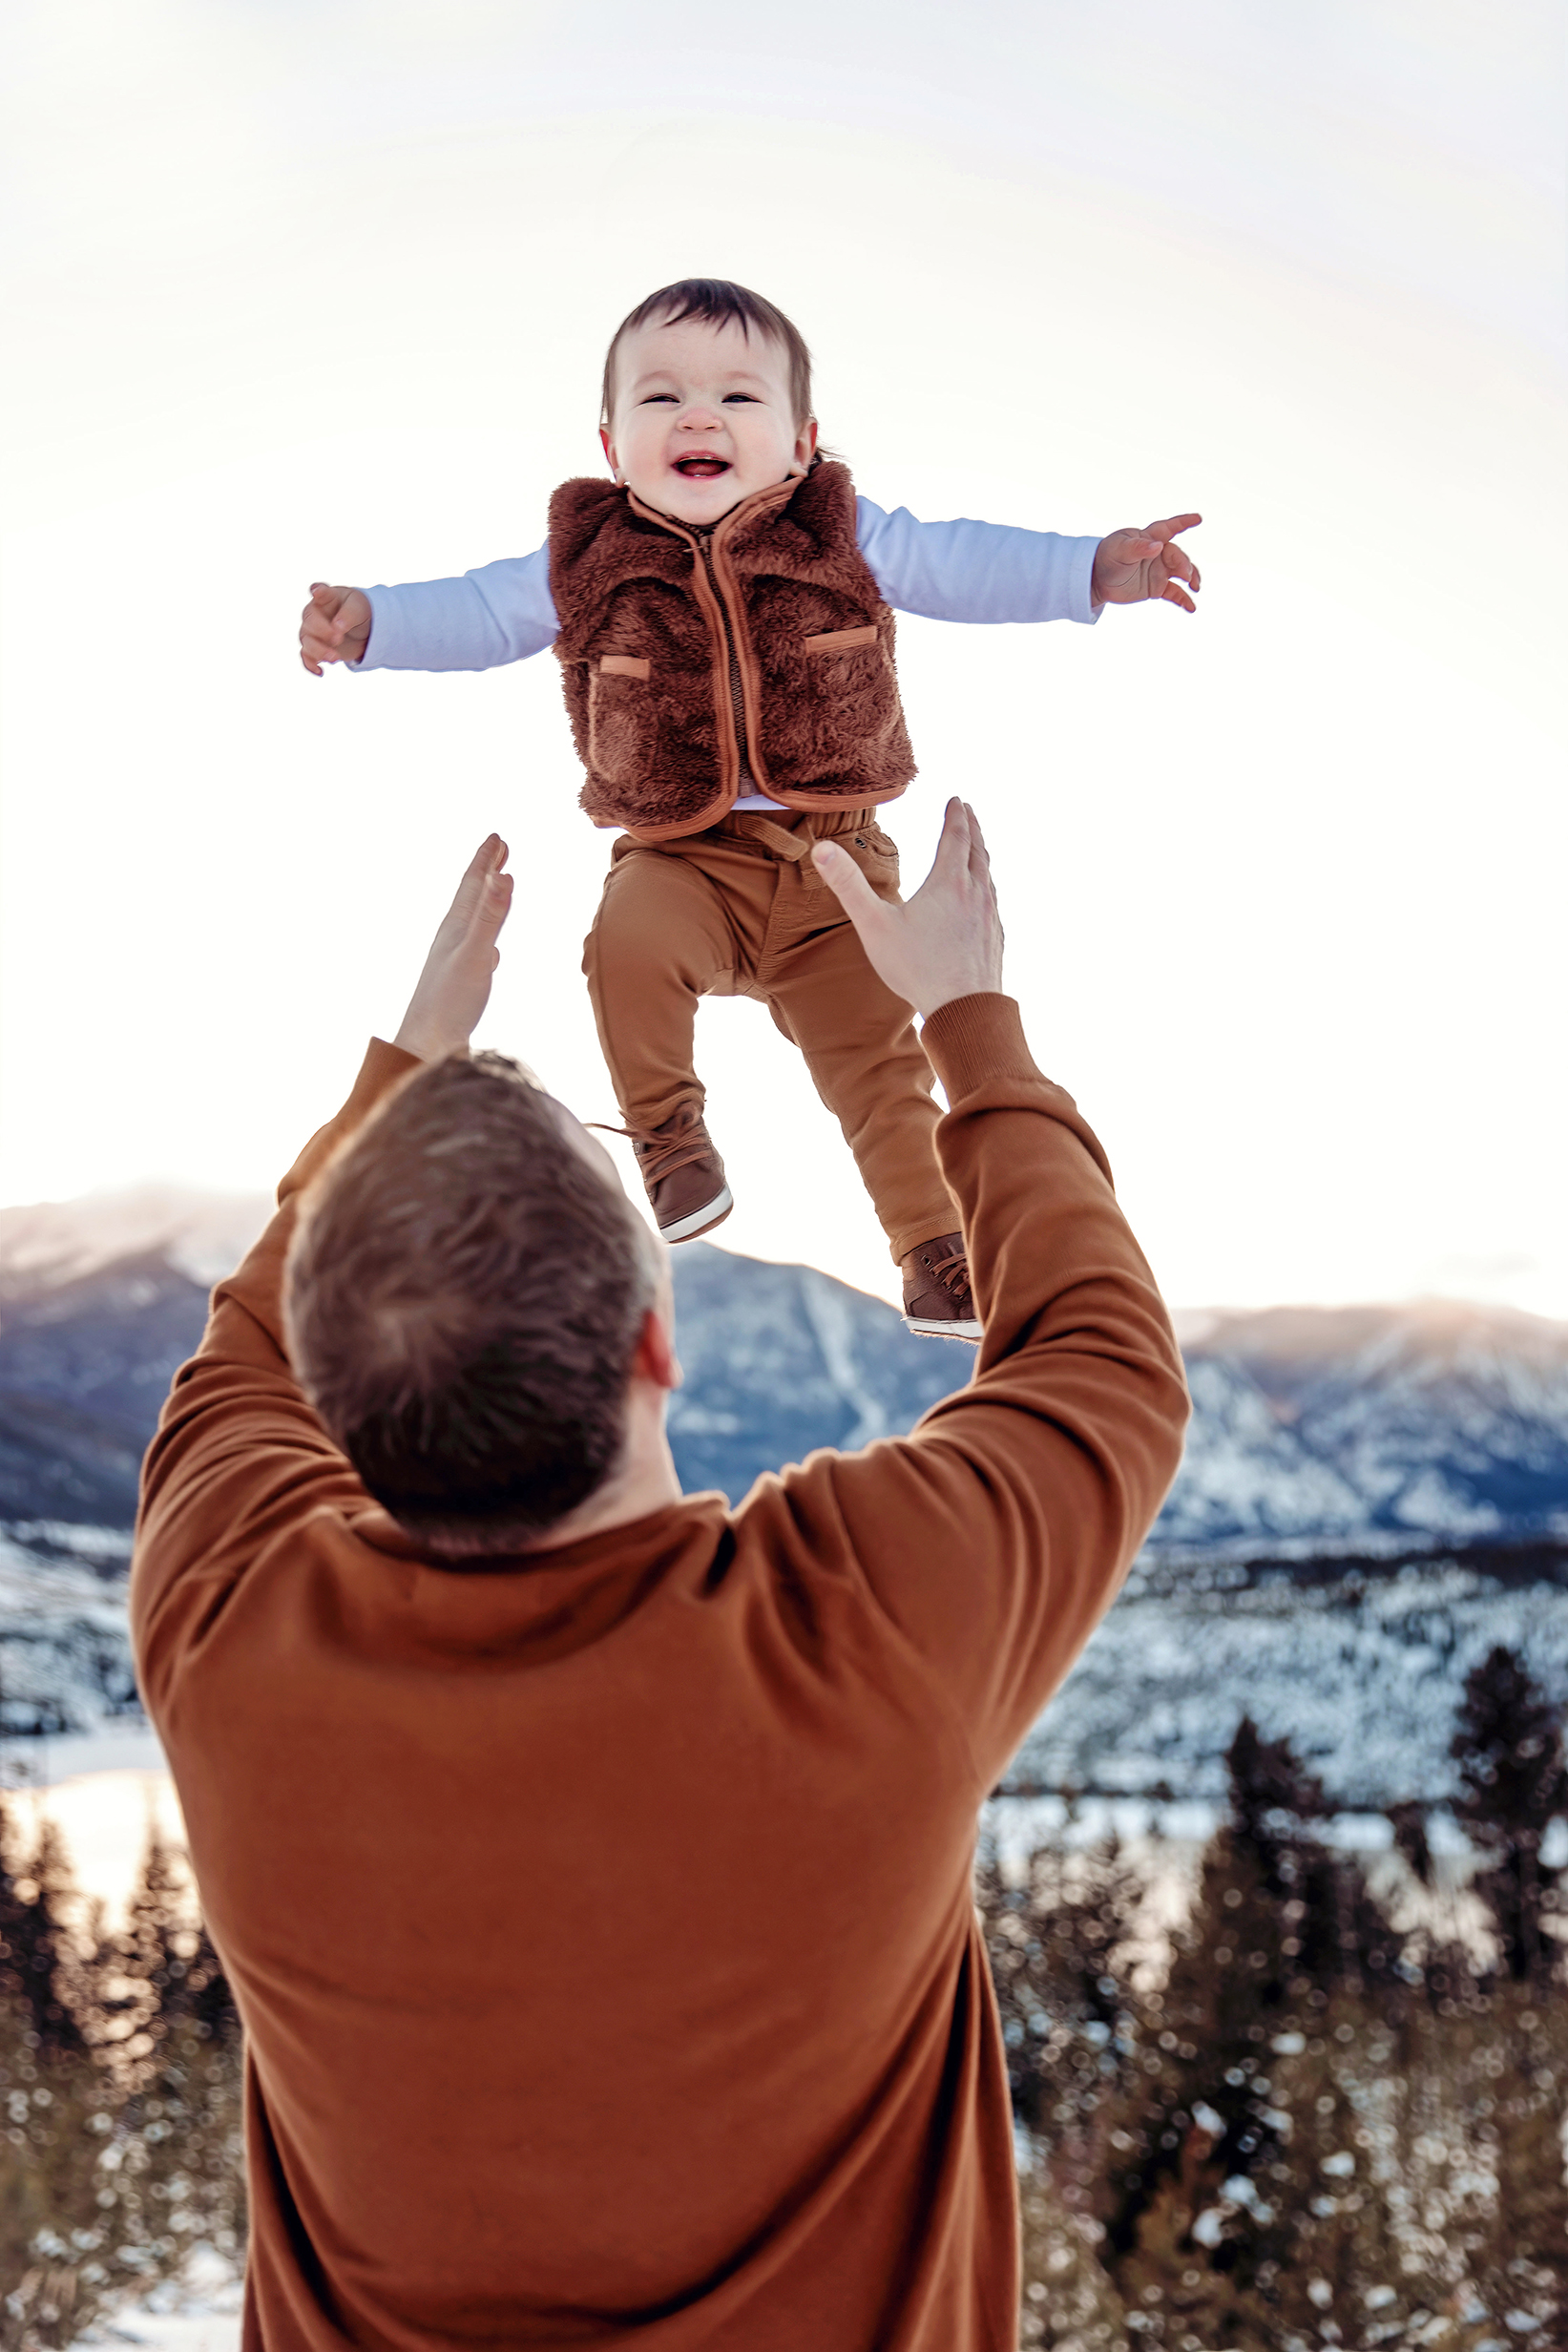 Dad throwing baby in the air